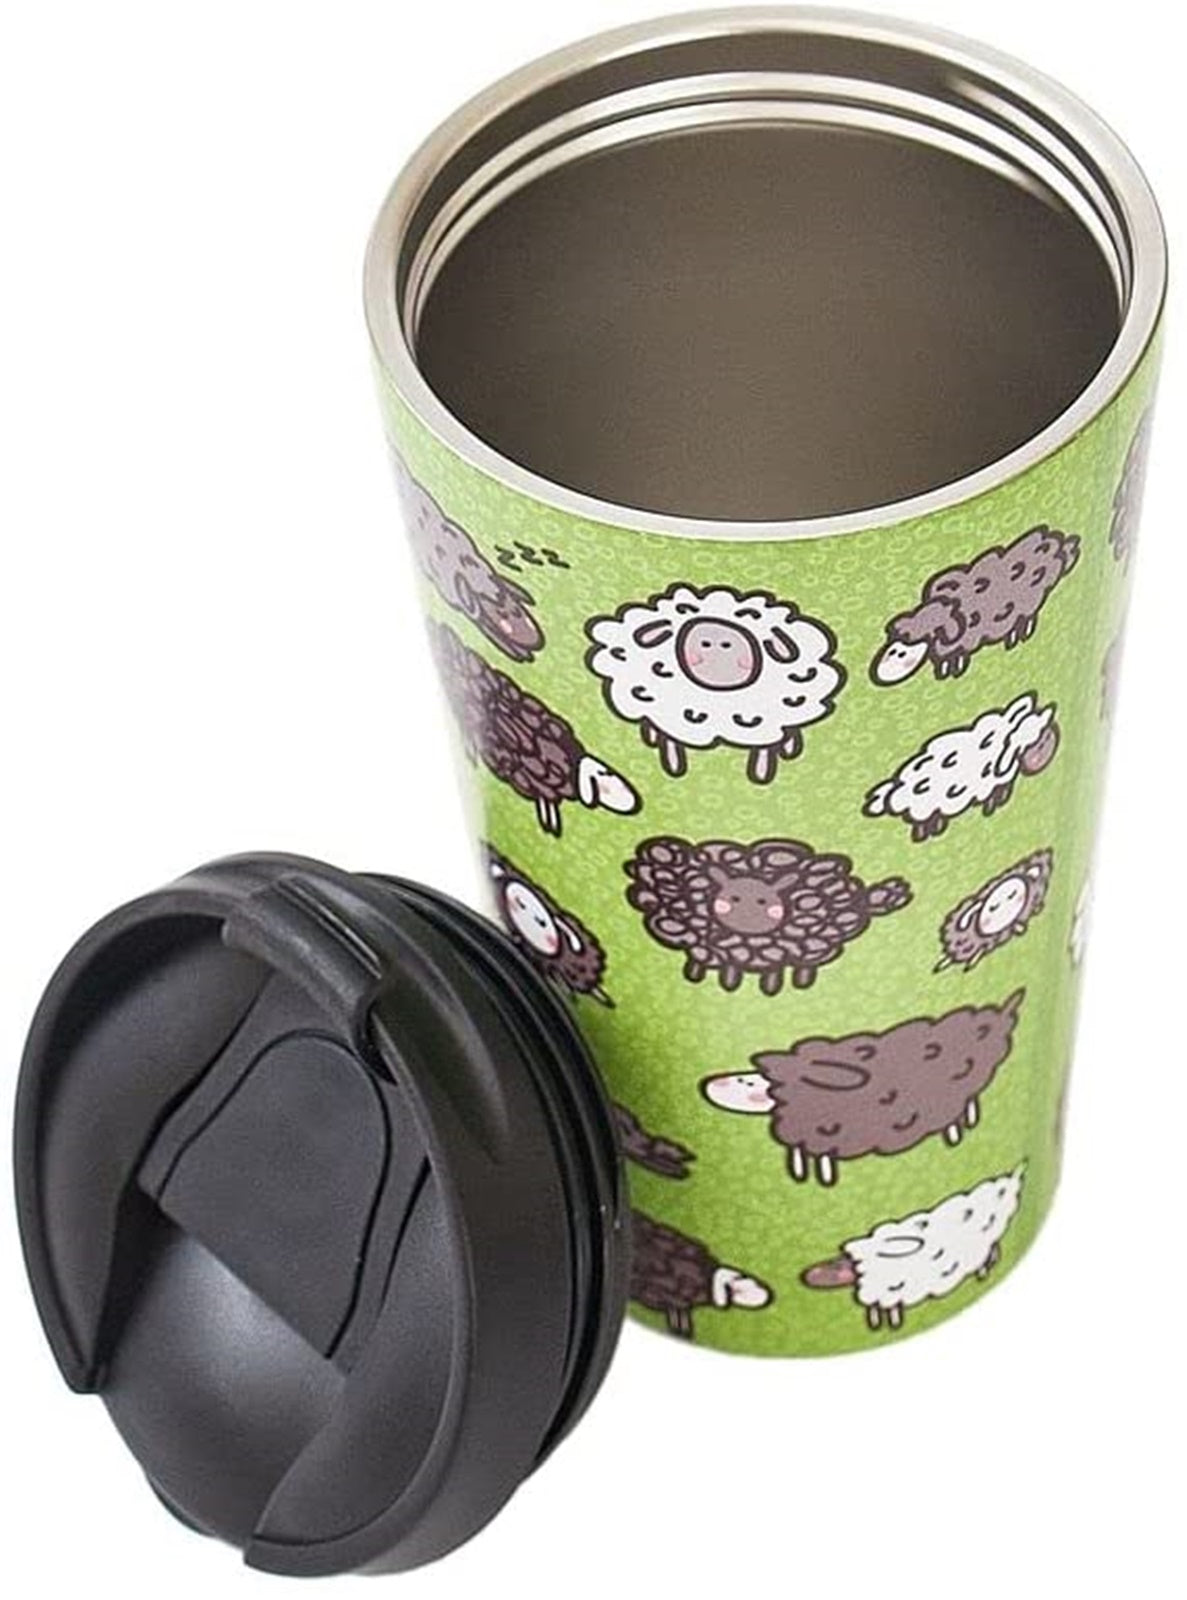 Eco Chic Reusable Thermal Coffee Cup | Stainless Steel Insulated Travel Mug with Leakproof Lid | Eco-Friendly and Reusable for Hot & Cold Drinks (Green Sheep, 380ml/13oz)